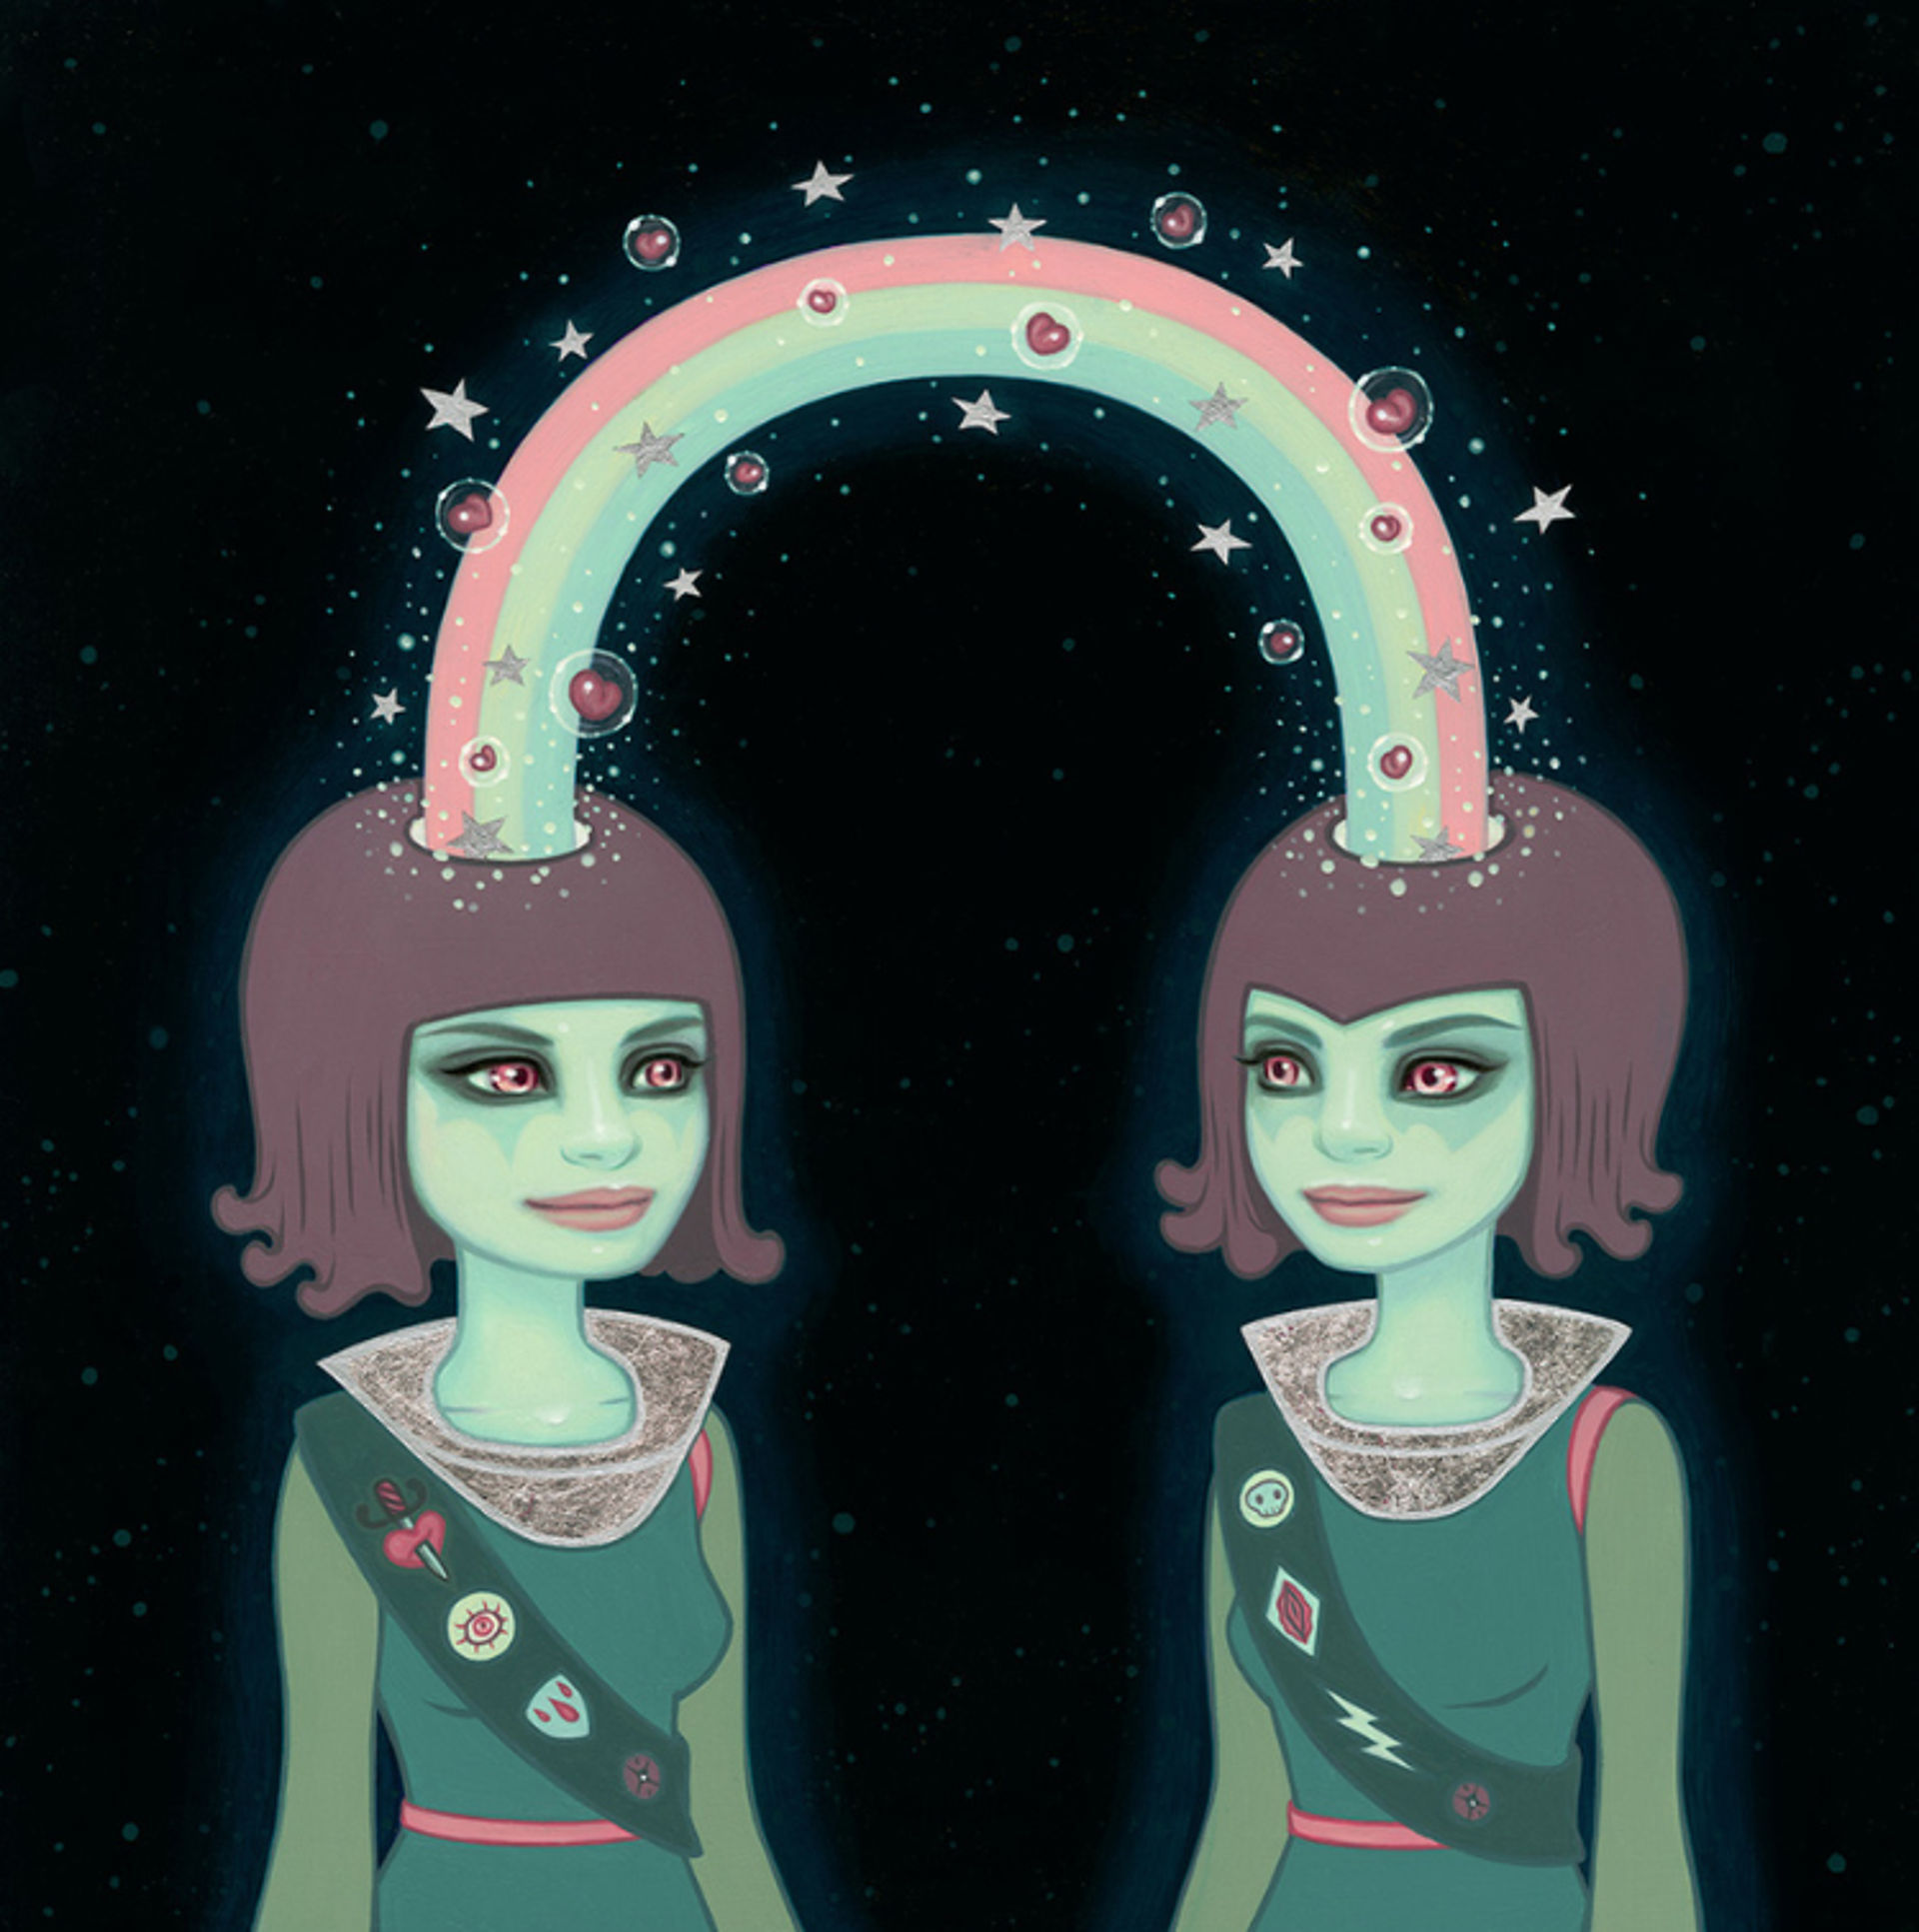 The Indestructible Energy Of Synchronicity In The Space Continuum (72/100) by Tara McPherson